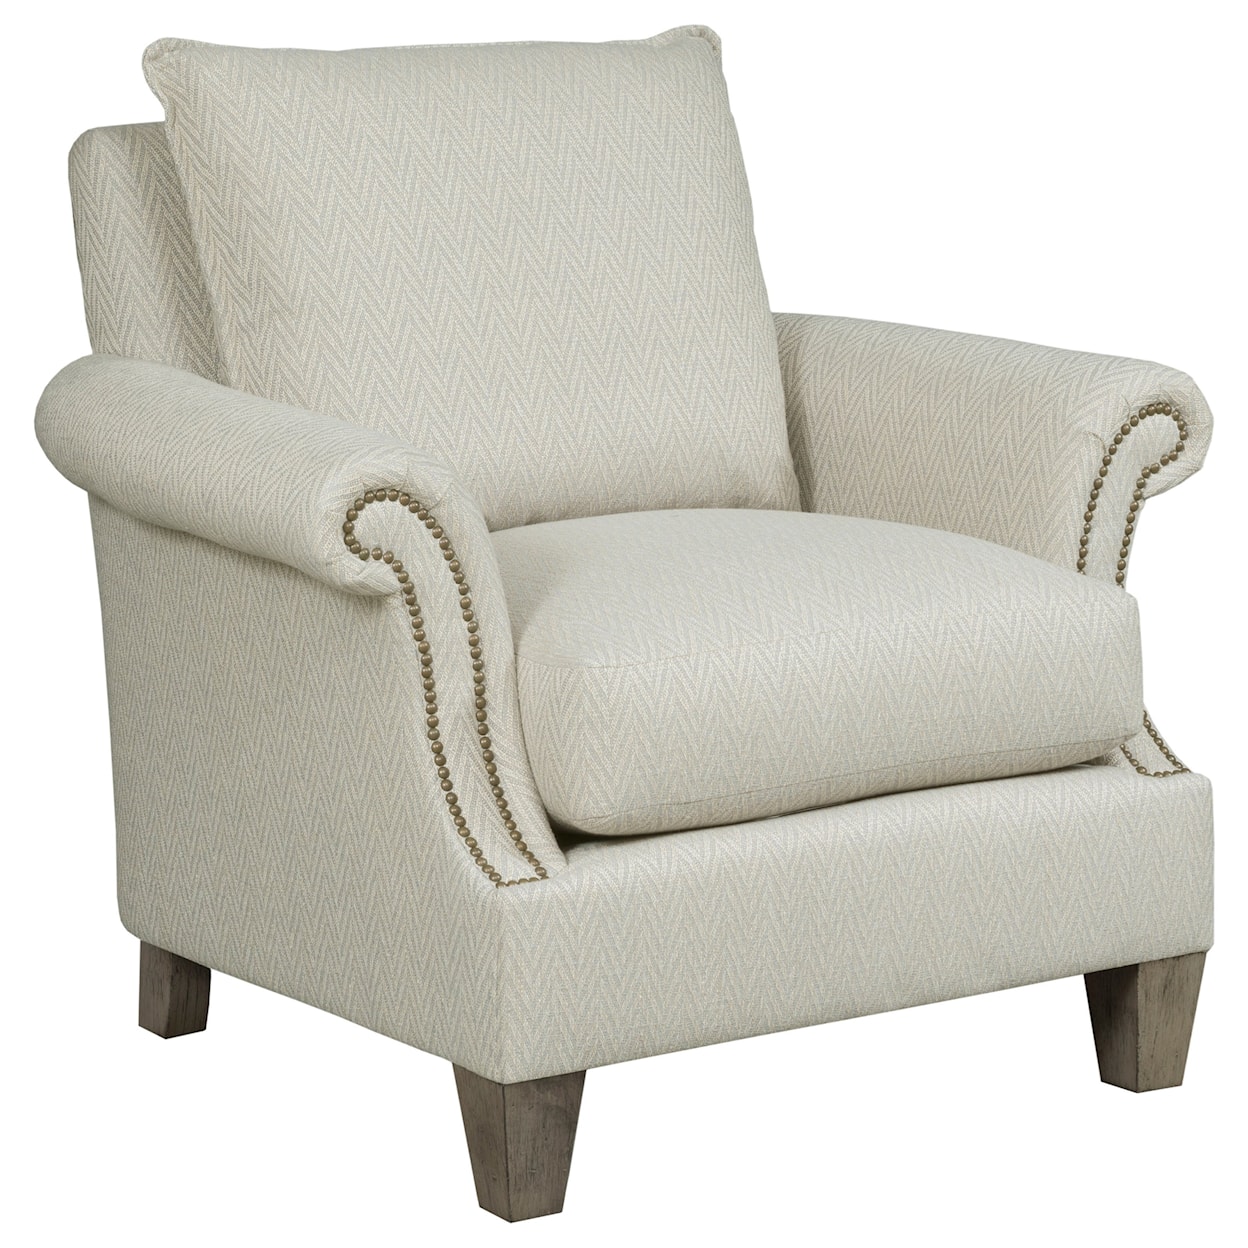 Kincaid Furniture Victoria 4 Upholstered Chair